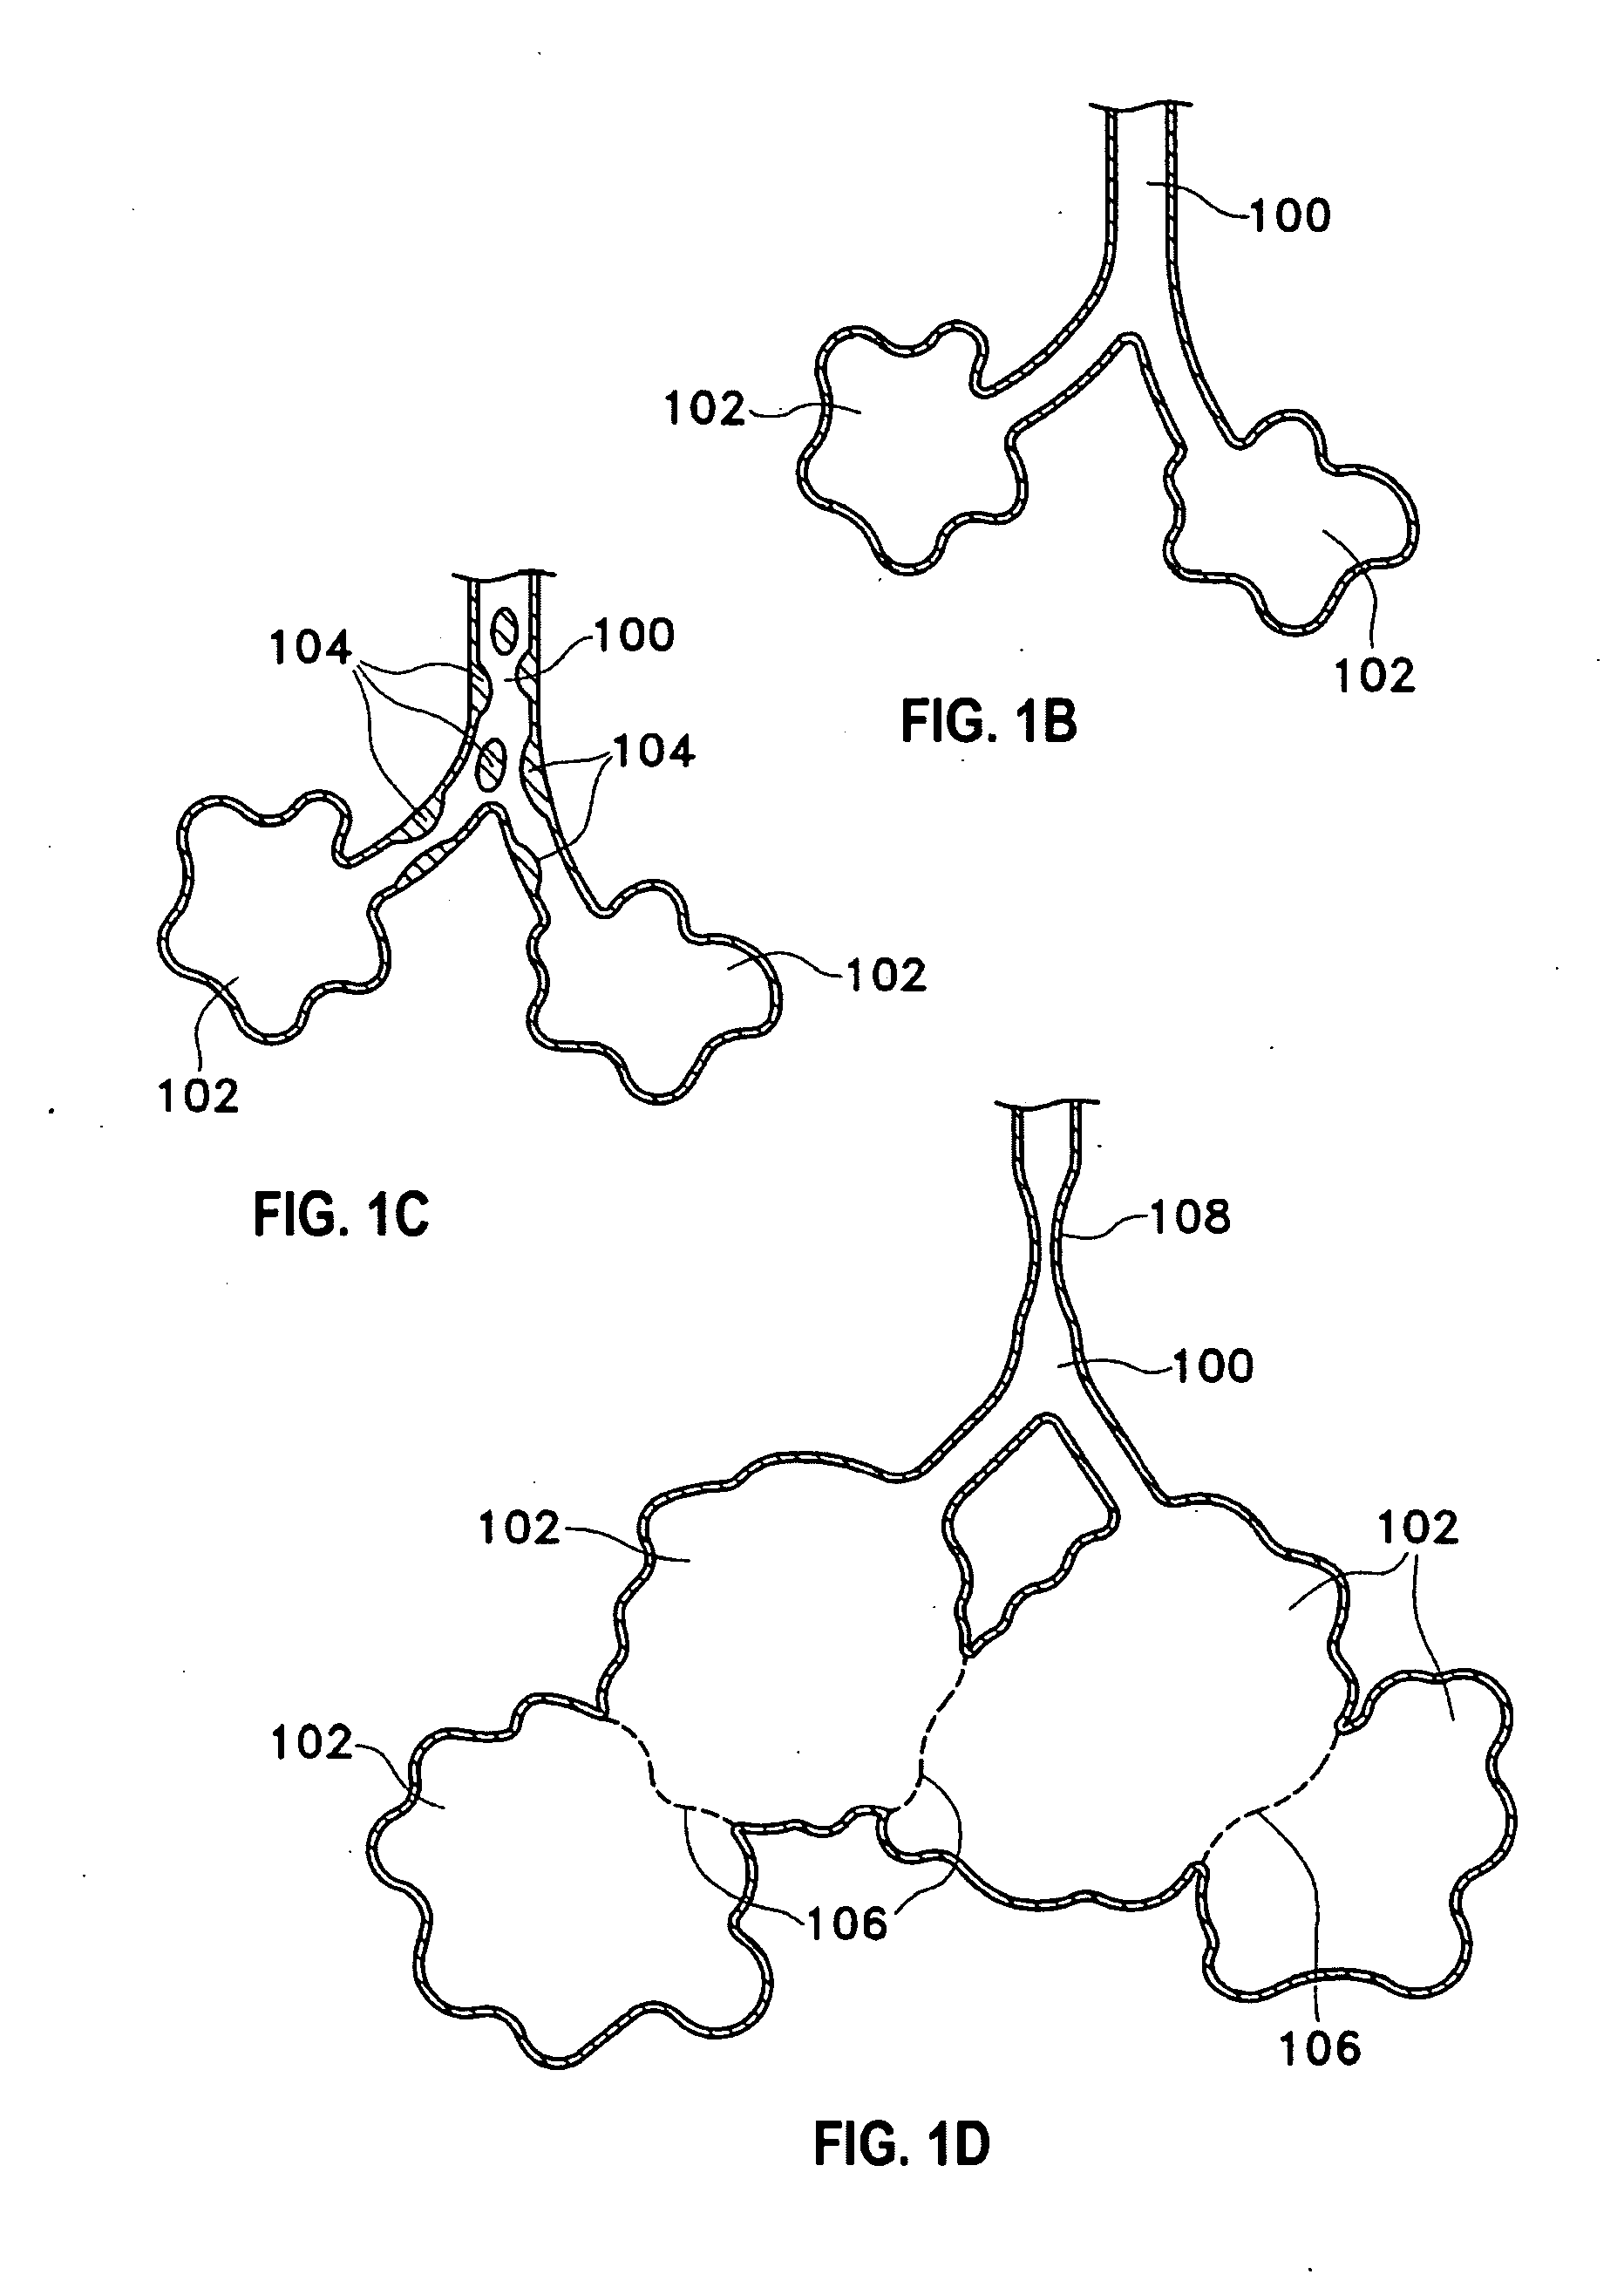 Extrapleural airway device and method